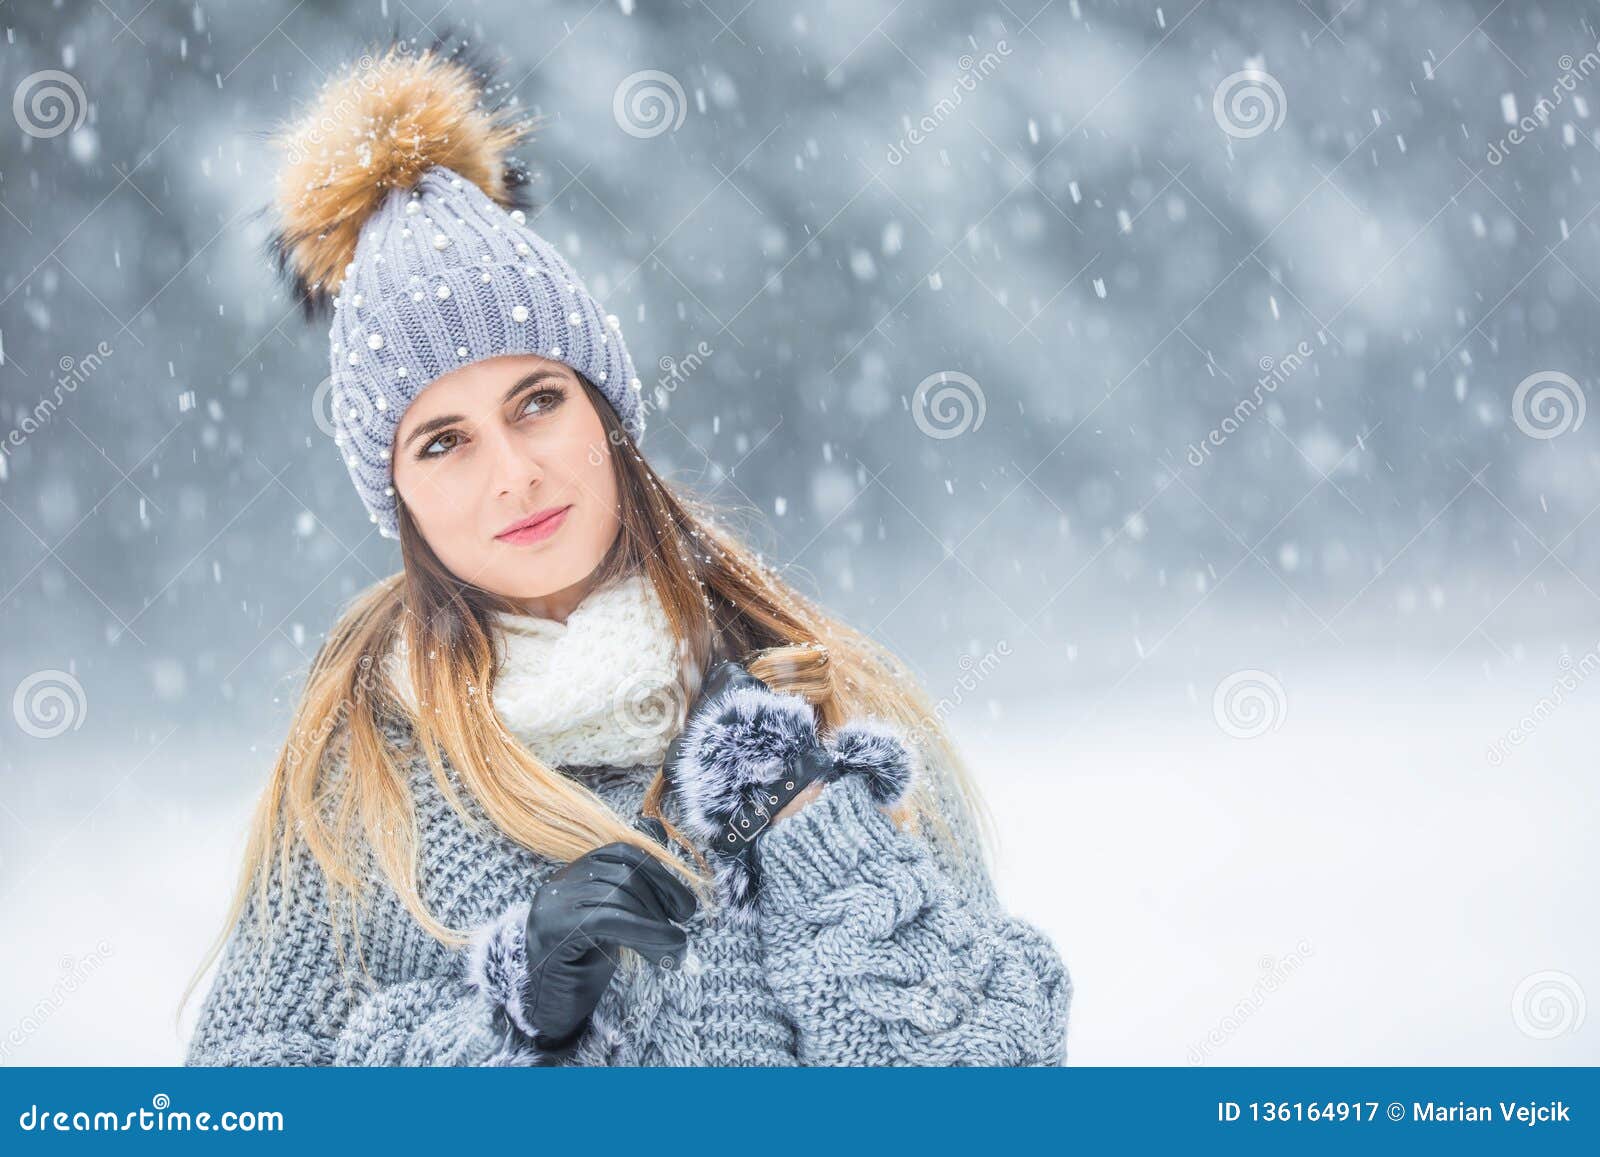 Portrait of Young Beautiful Woman in Winter Clothes and Strong Snowing ...